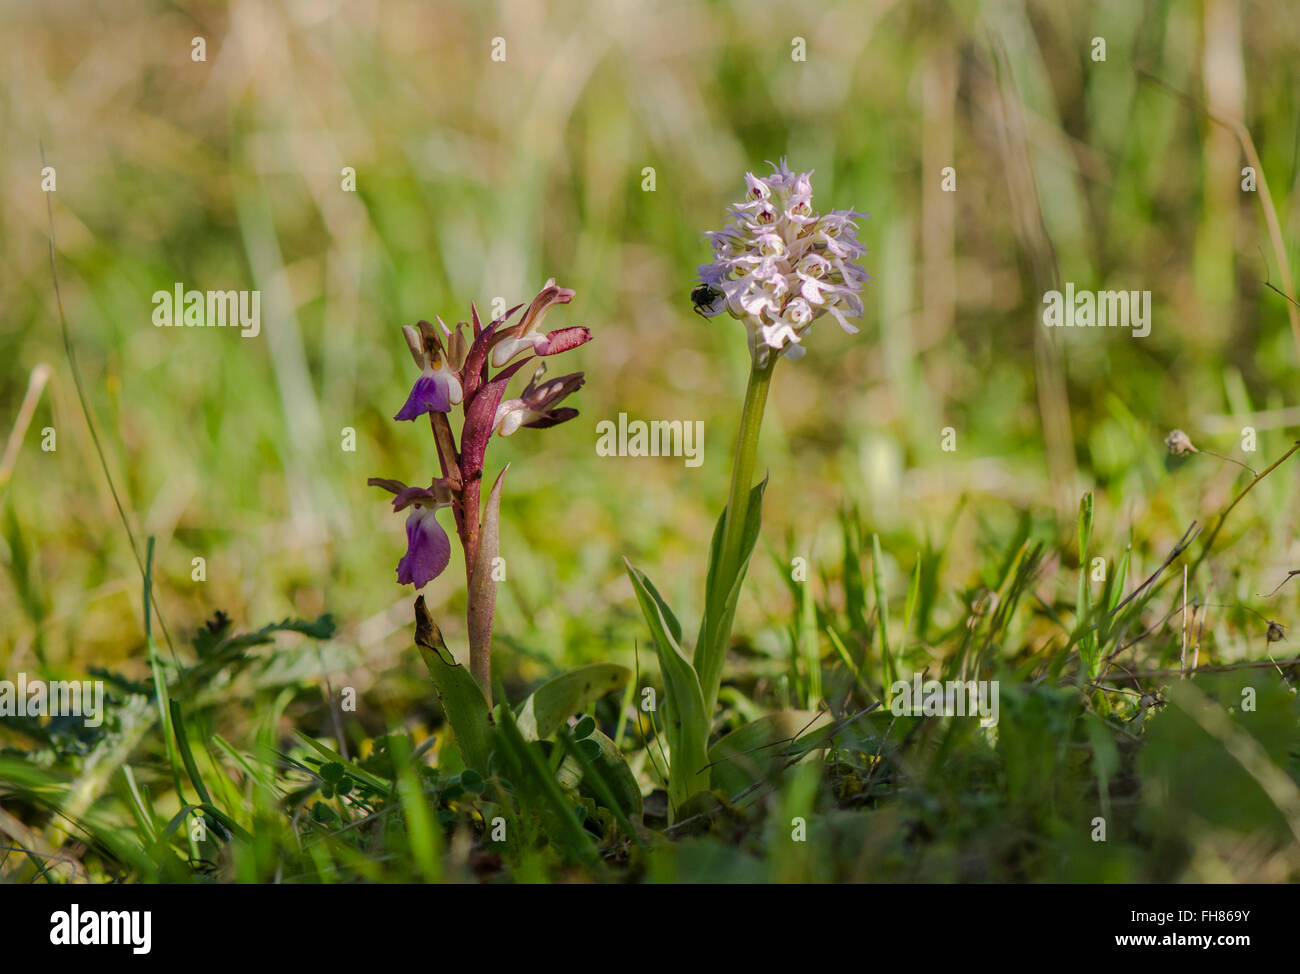 Fan-lipped Orchid, Orchis saccata and Conical orchid, Orchis conica, wild orchid in Andalusia, Southern Spain. Stock Photo